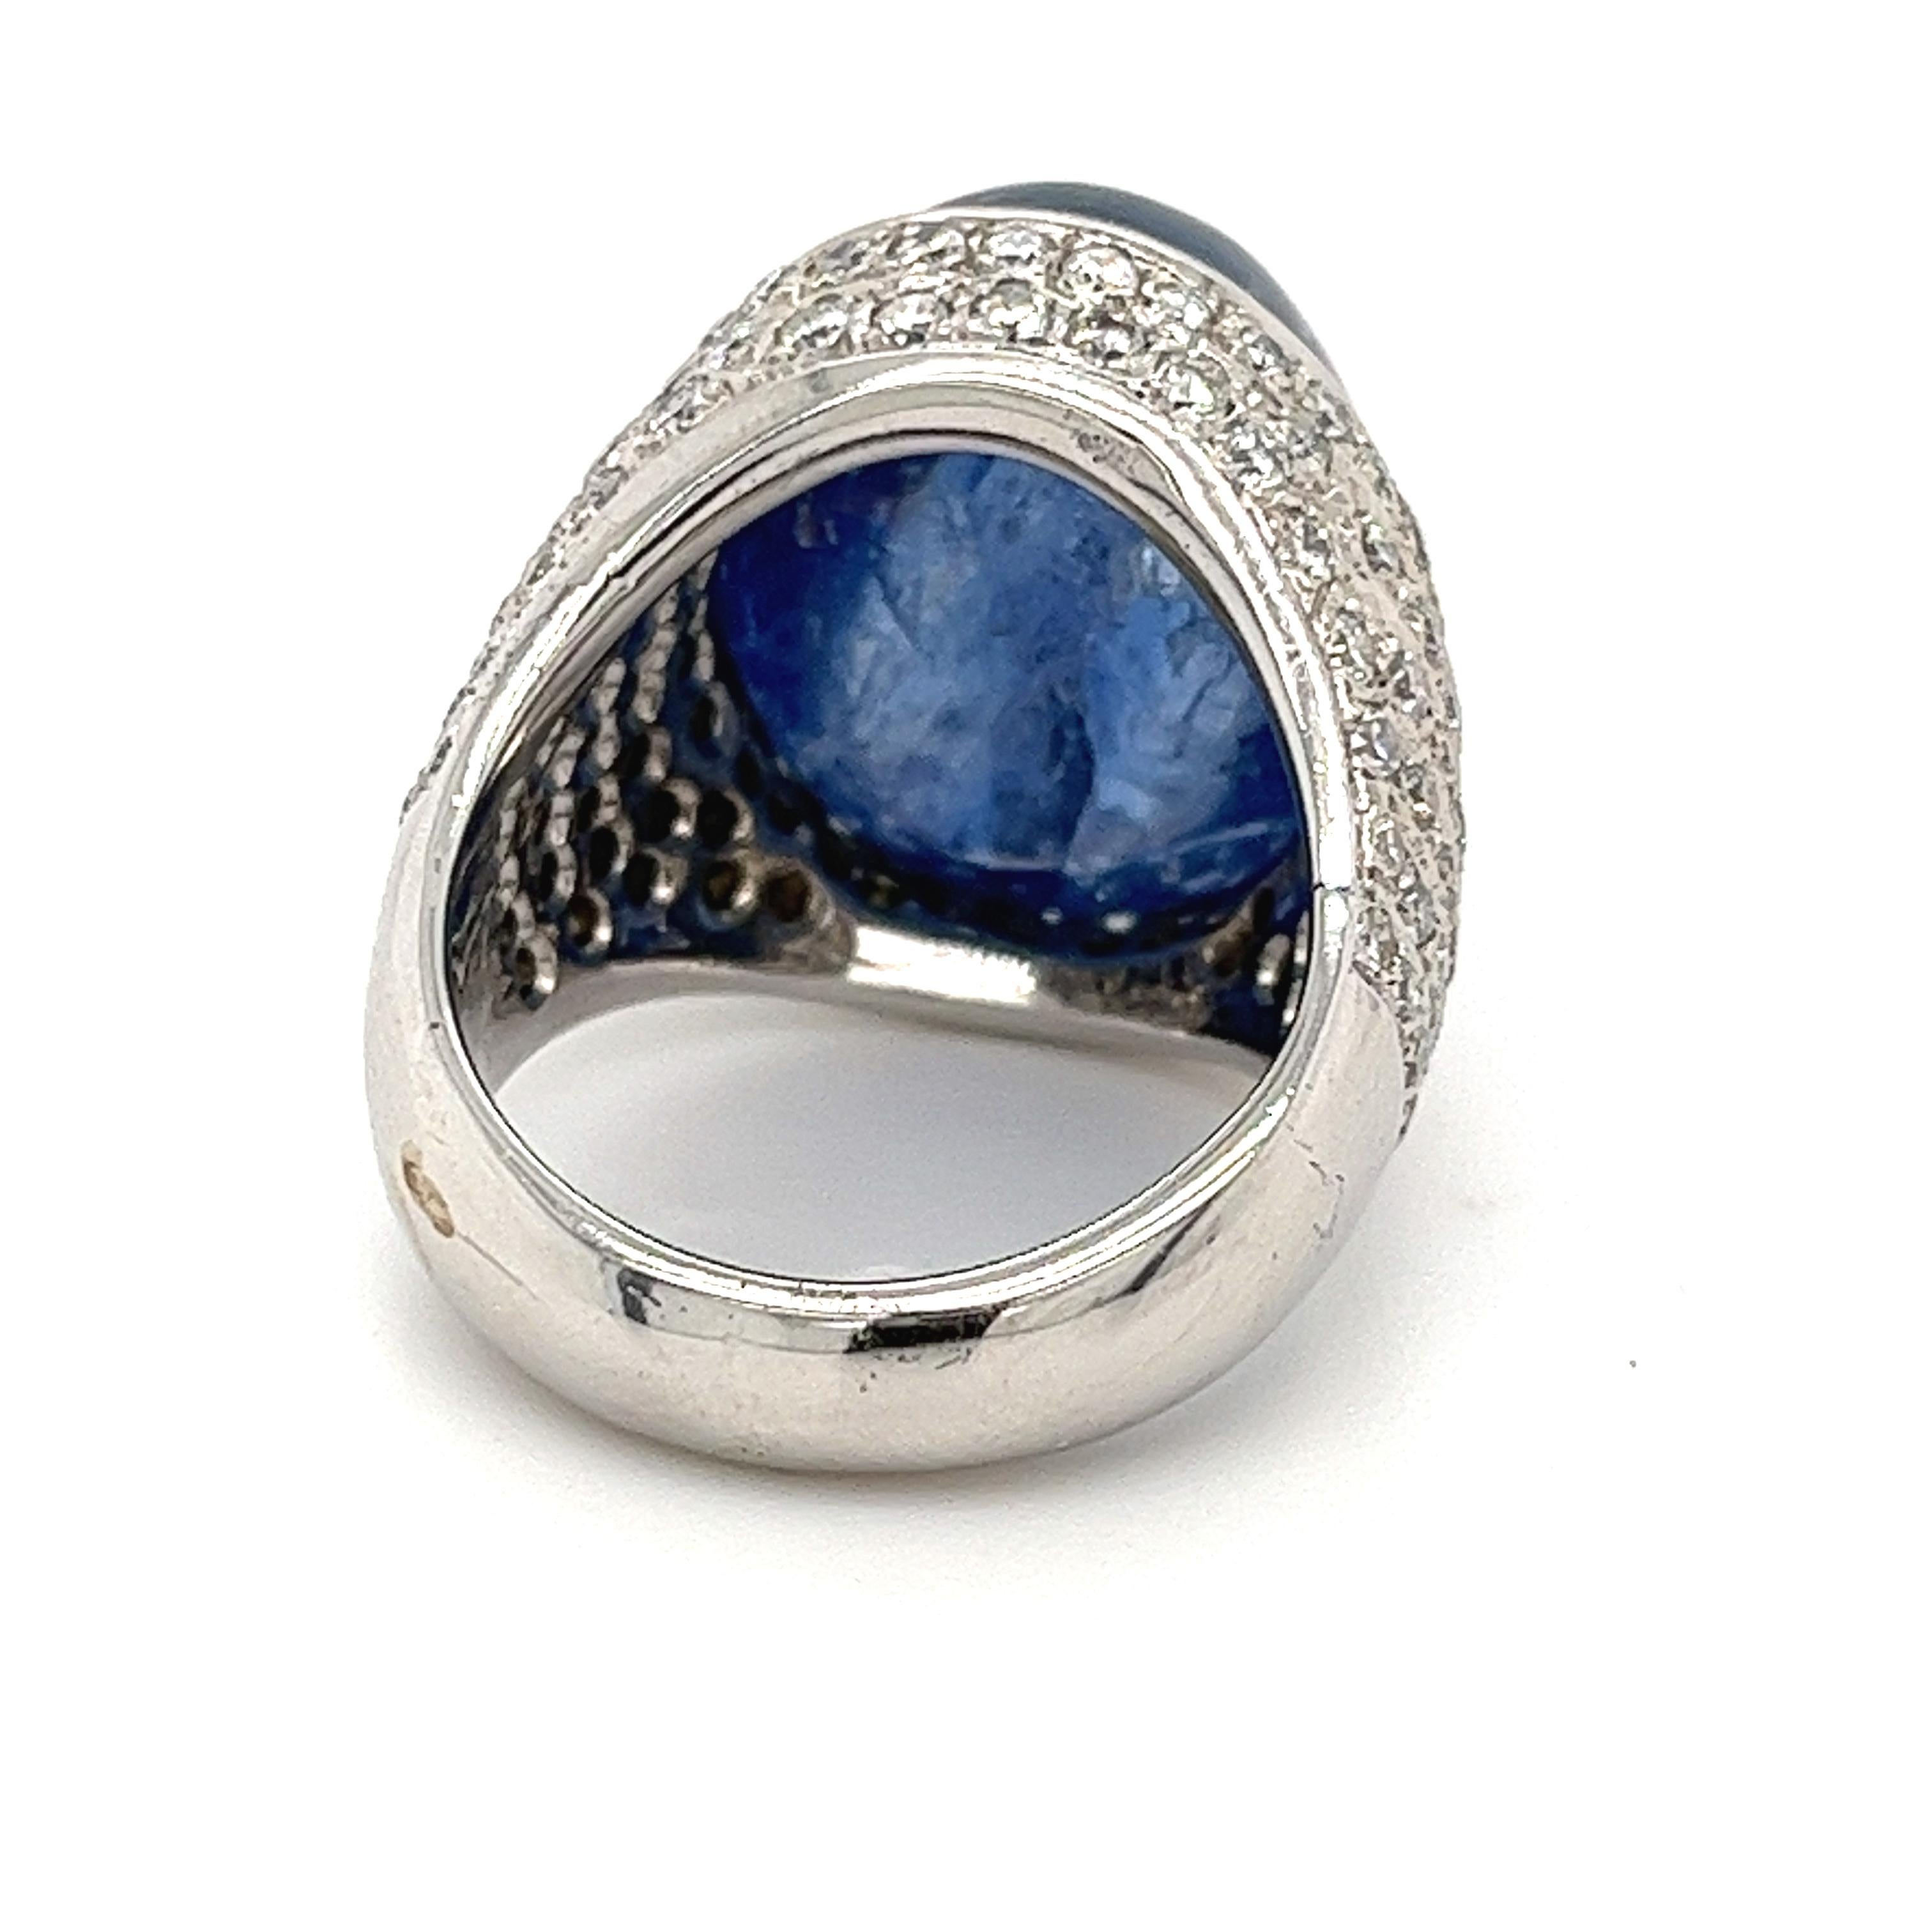 Shop this absolute masterpiece Blue Sapphire and Diamond ring. GIA certified. This Sapphire bears excellent luster and brilliance, with no indications of clarity or color enhancements. At a massive weight of 26 carats, with such a lively color and